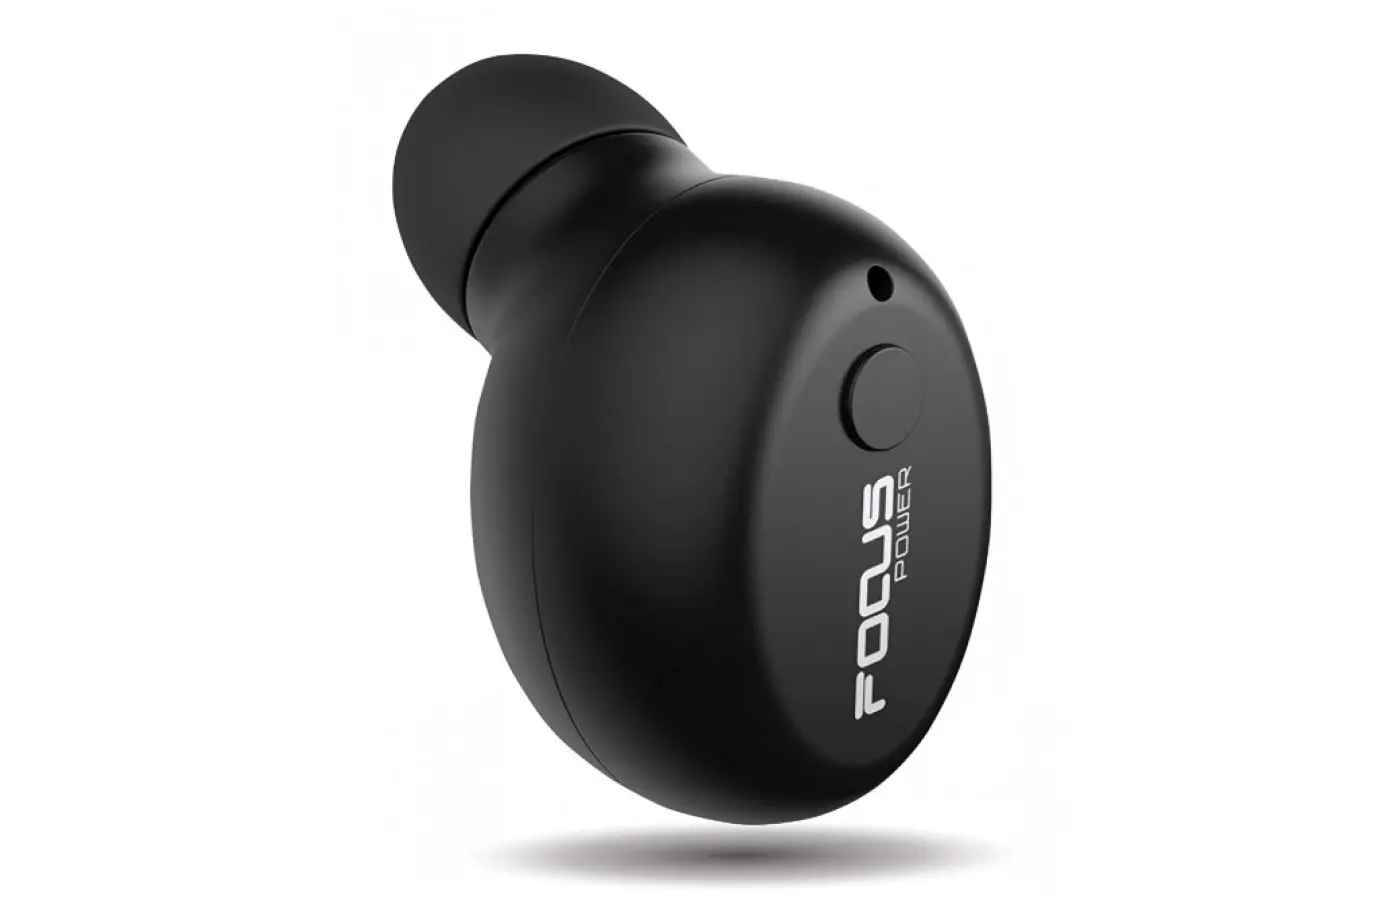 The Focuspower f10 is one of the most affordable bluetooth earbuds out there.